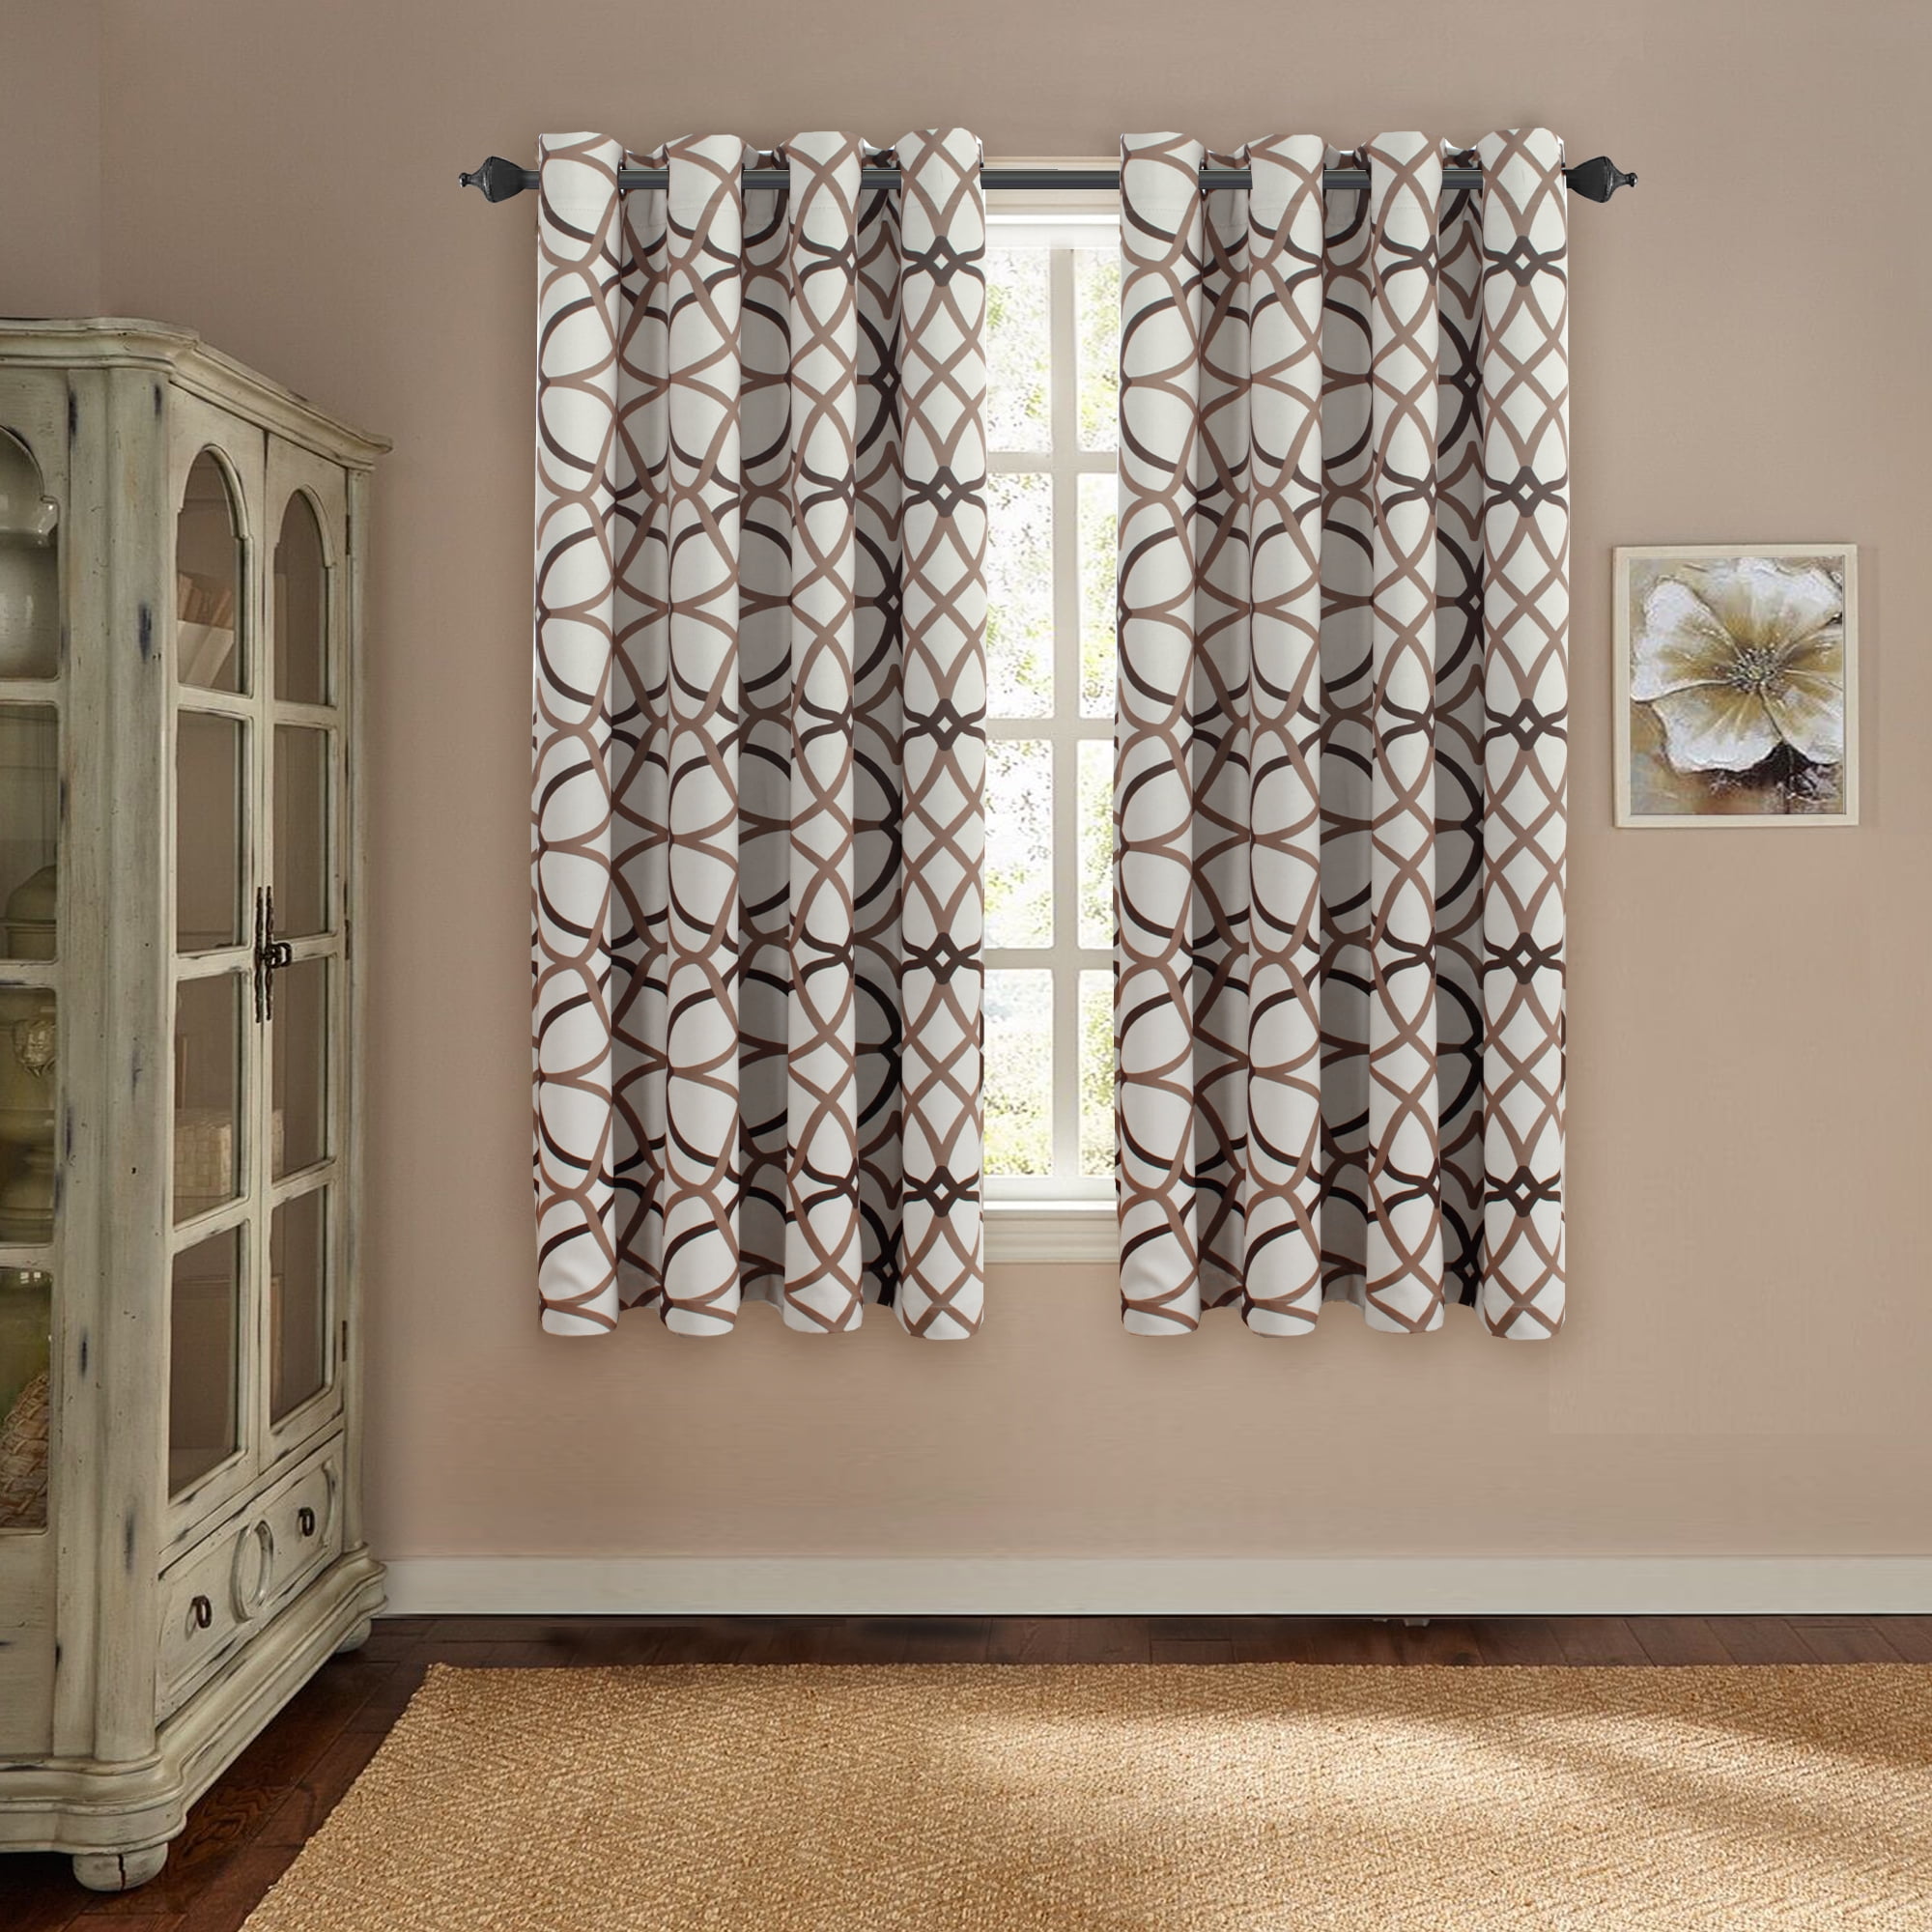 Set 2 Panels Room Thermal Insulated Blackout 3D Window Curtain,55 x 39-inches 